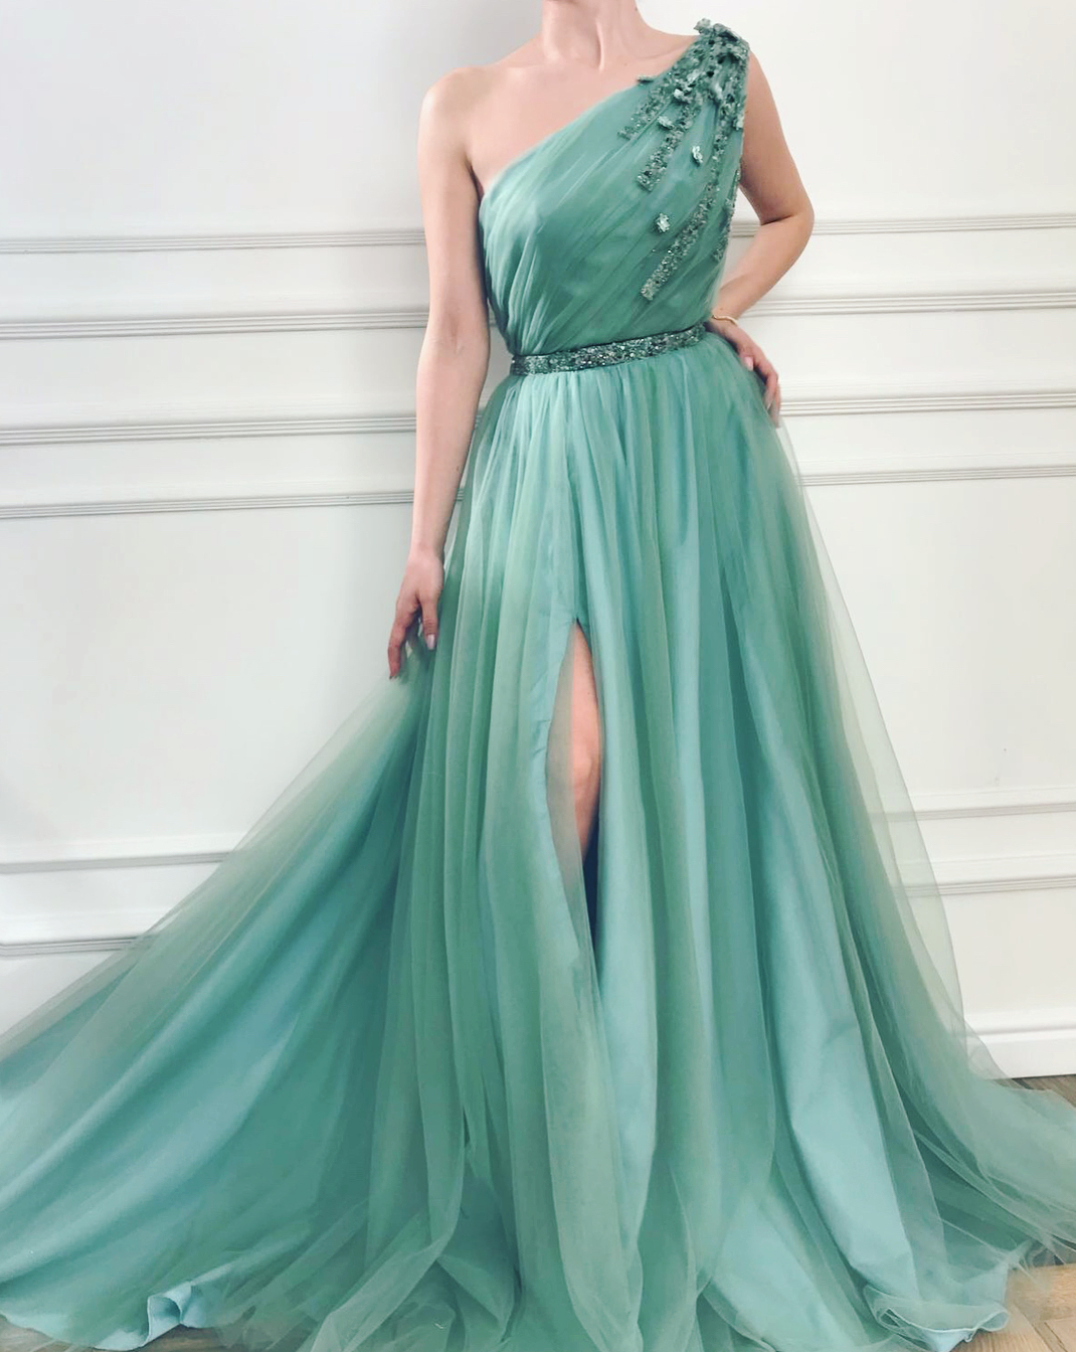 Green A-Line dress with one shoulder sleeve and embroidery